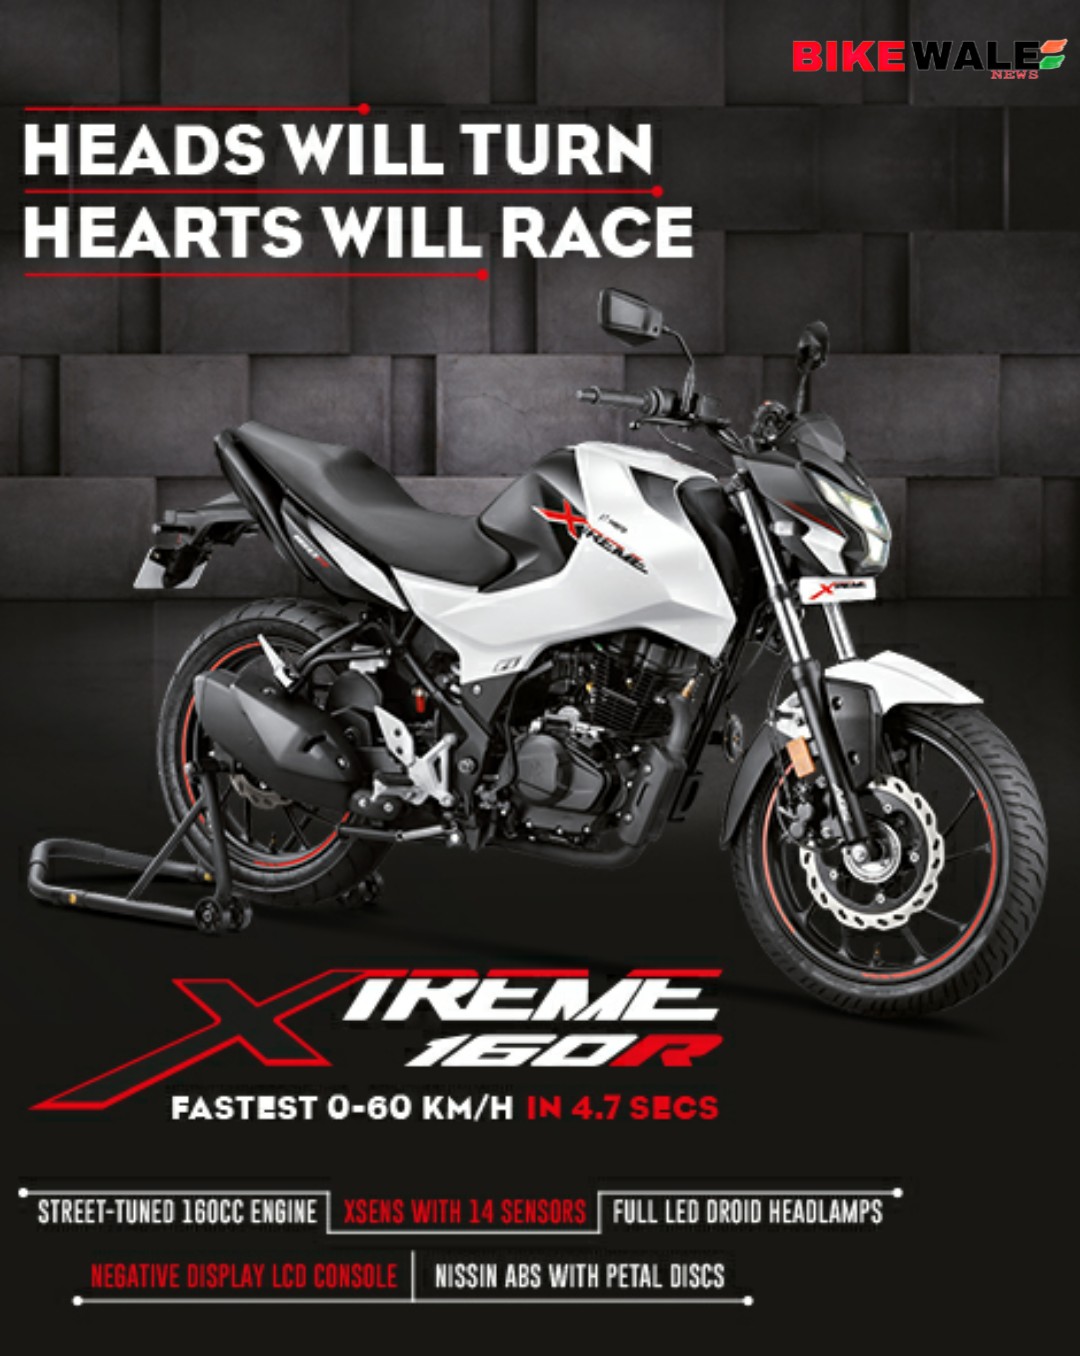 Hero Xtreme 160r Bs6 Price In India